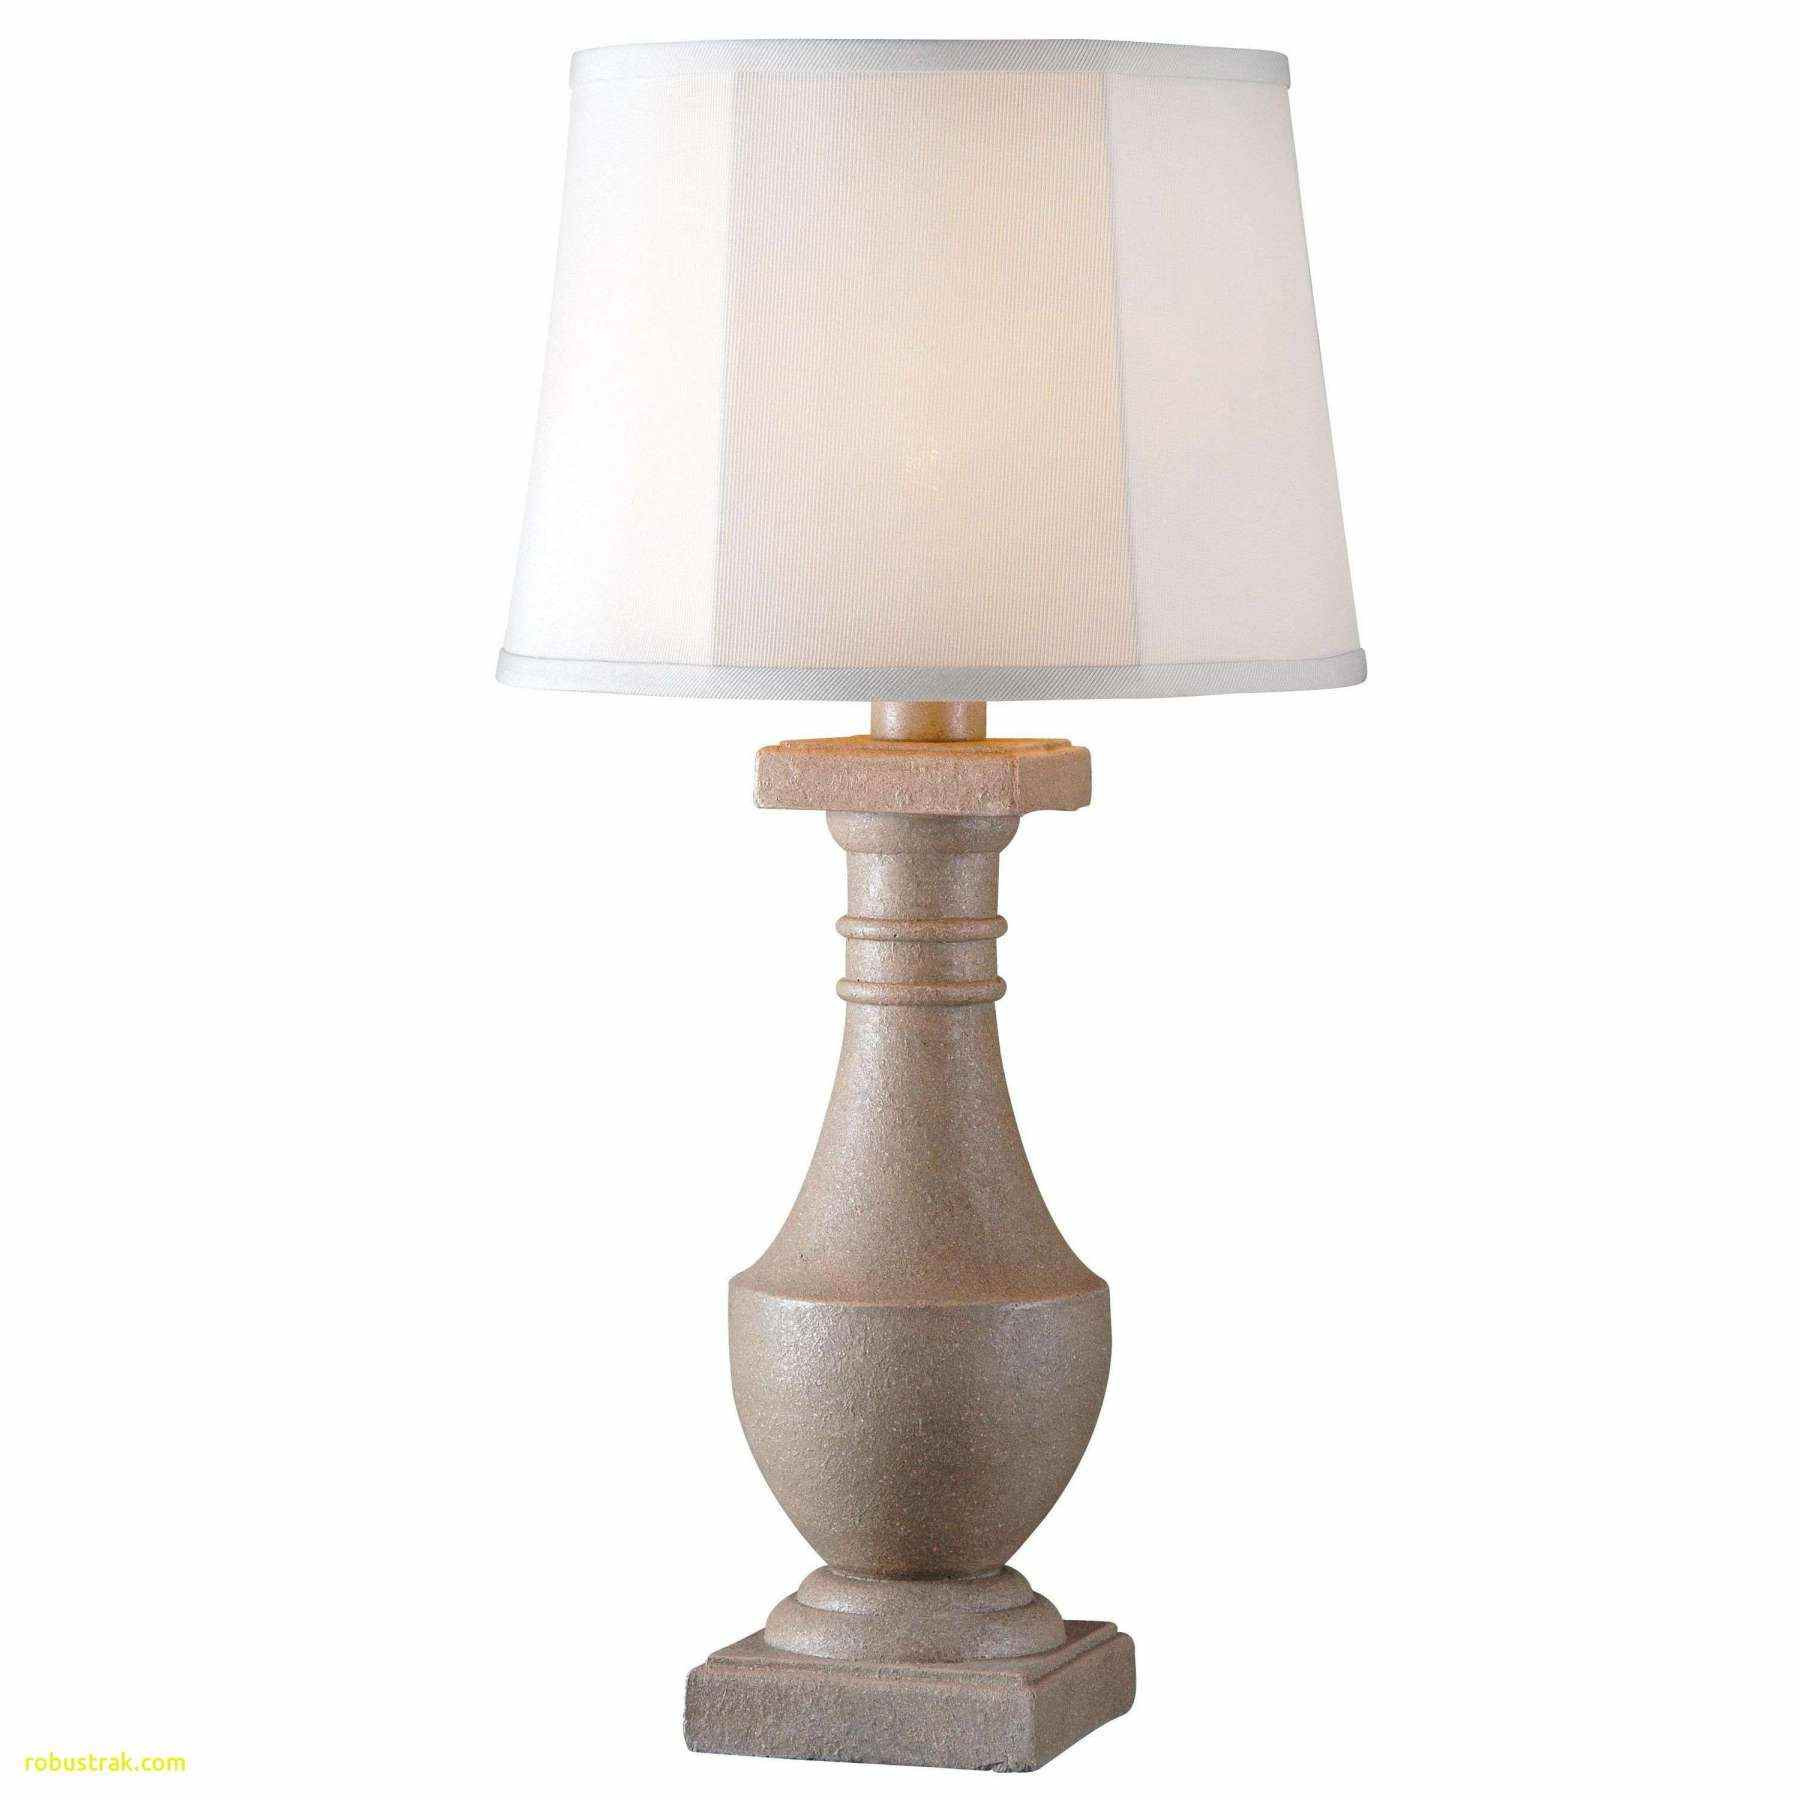 12 Unique Chinese Vase Table Lamps 2024 free download chinese vase table lamps of small gold table lamp for home design small black nightstand inside small gold table lamp until 15 best kids table lamp wonderfull lighting world